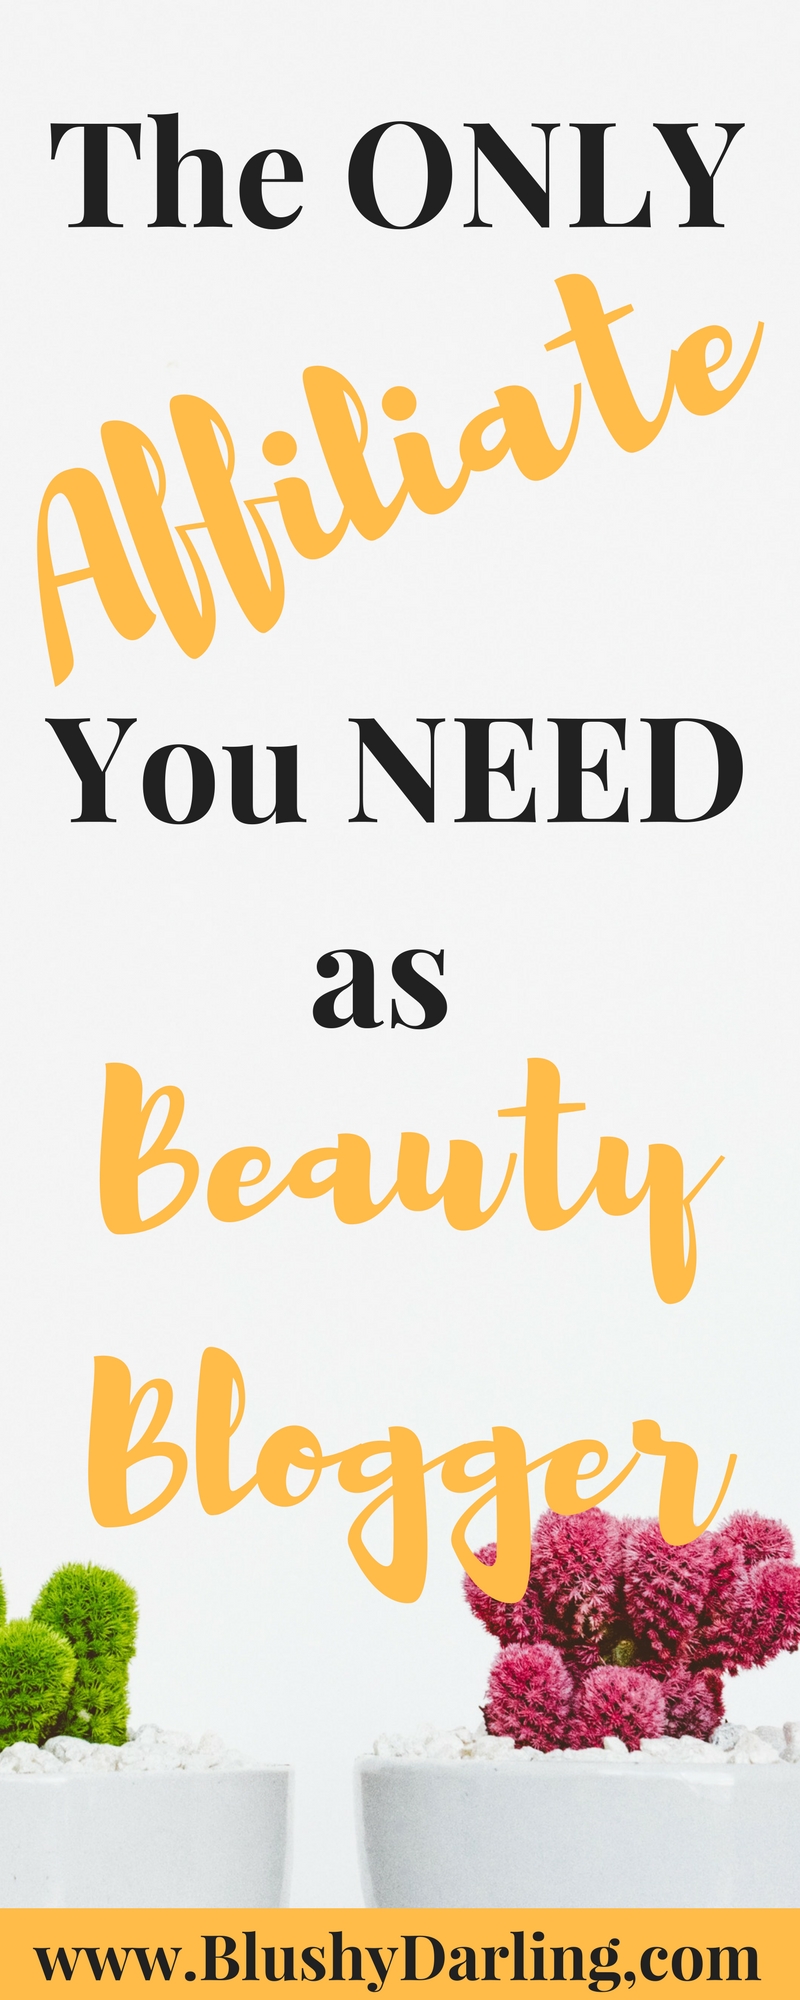 Sharing with you the ONLY affiliate you need if you are a beauty blogger #blogging